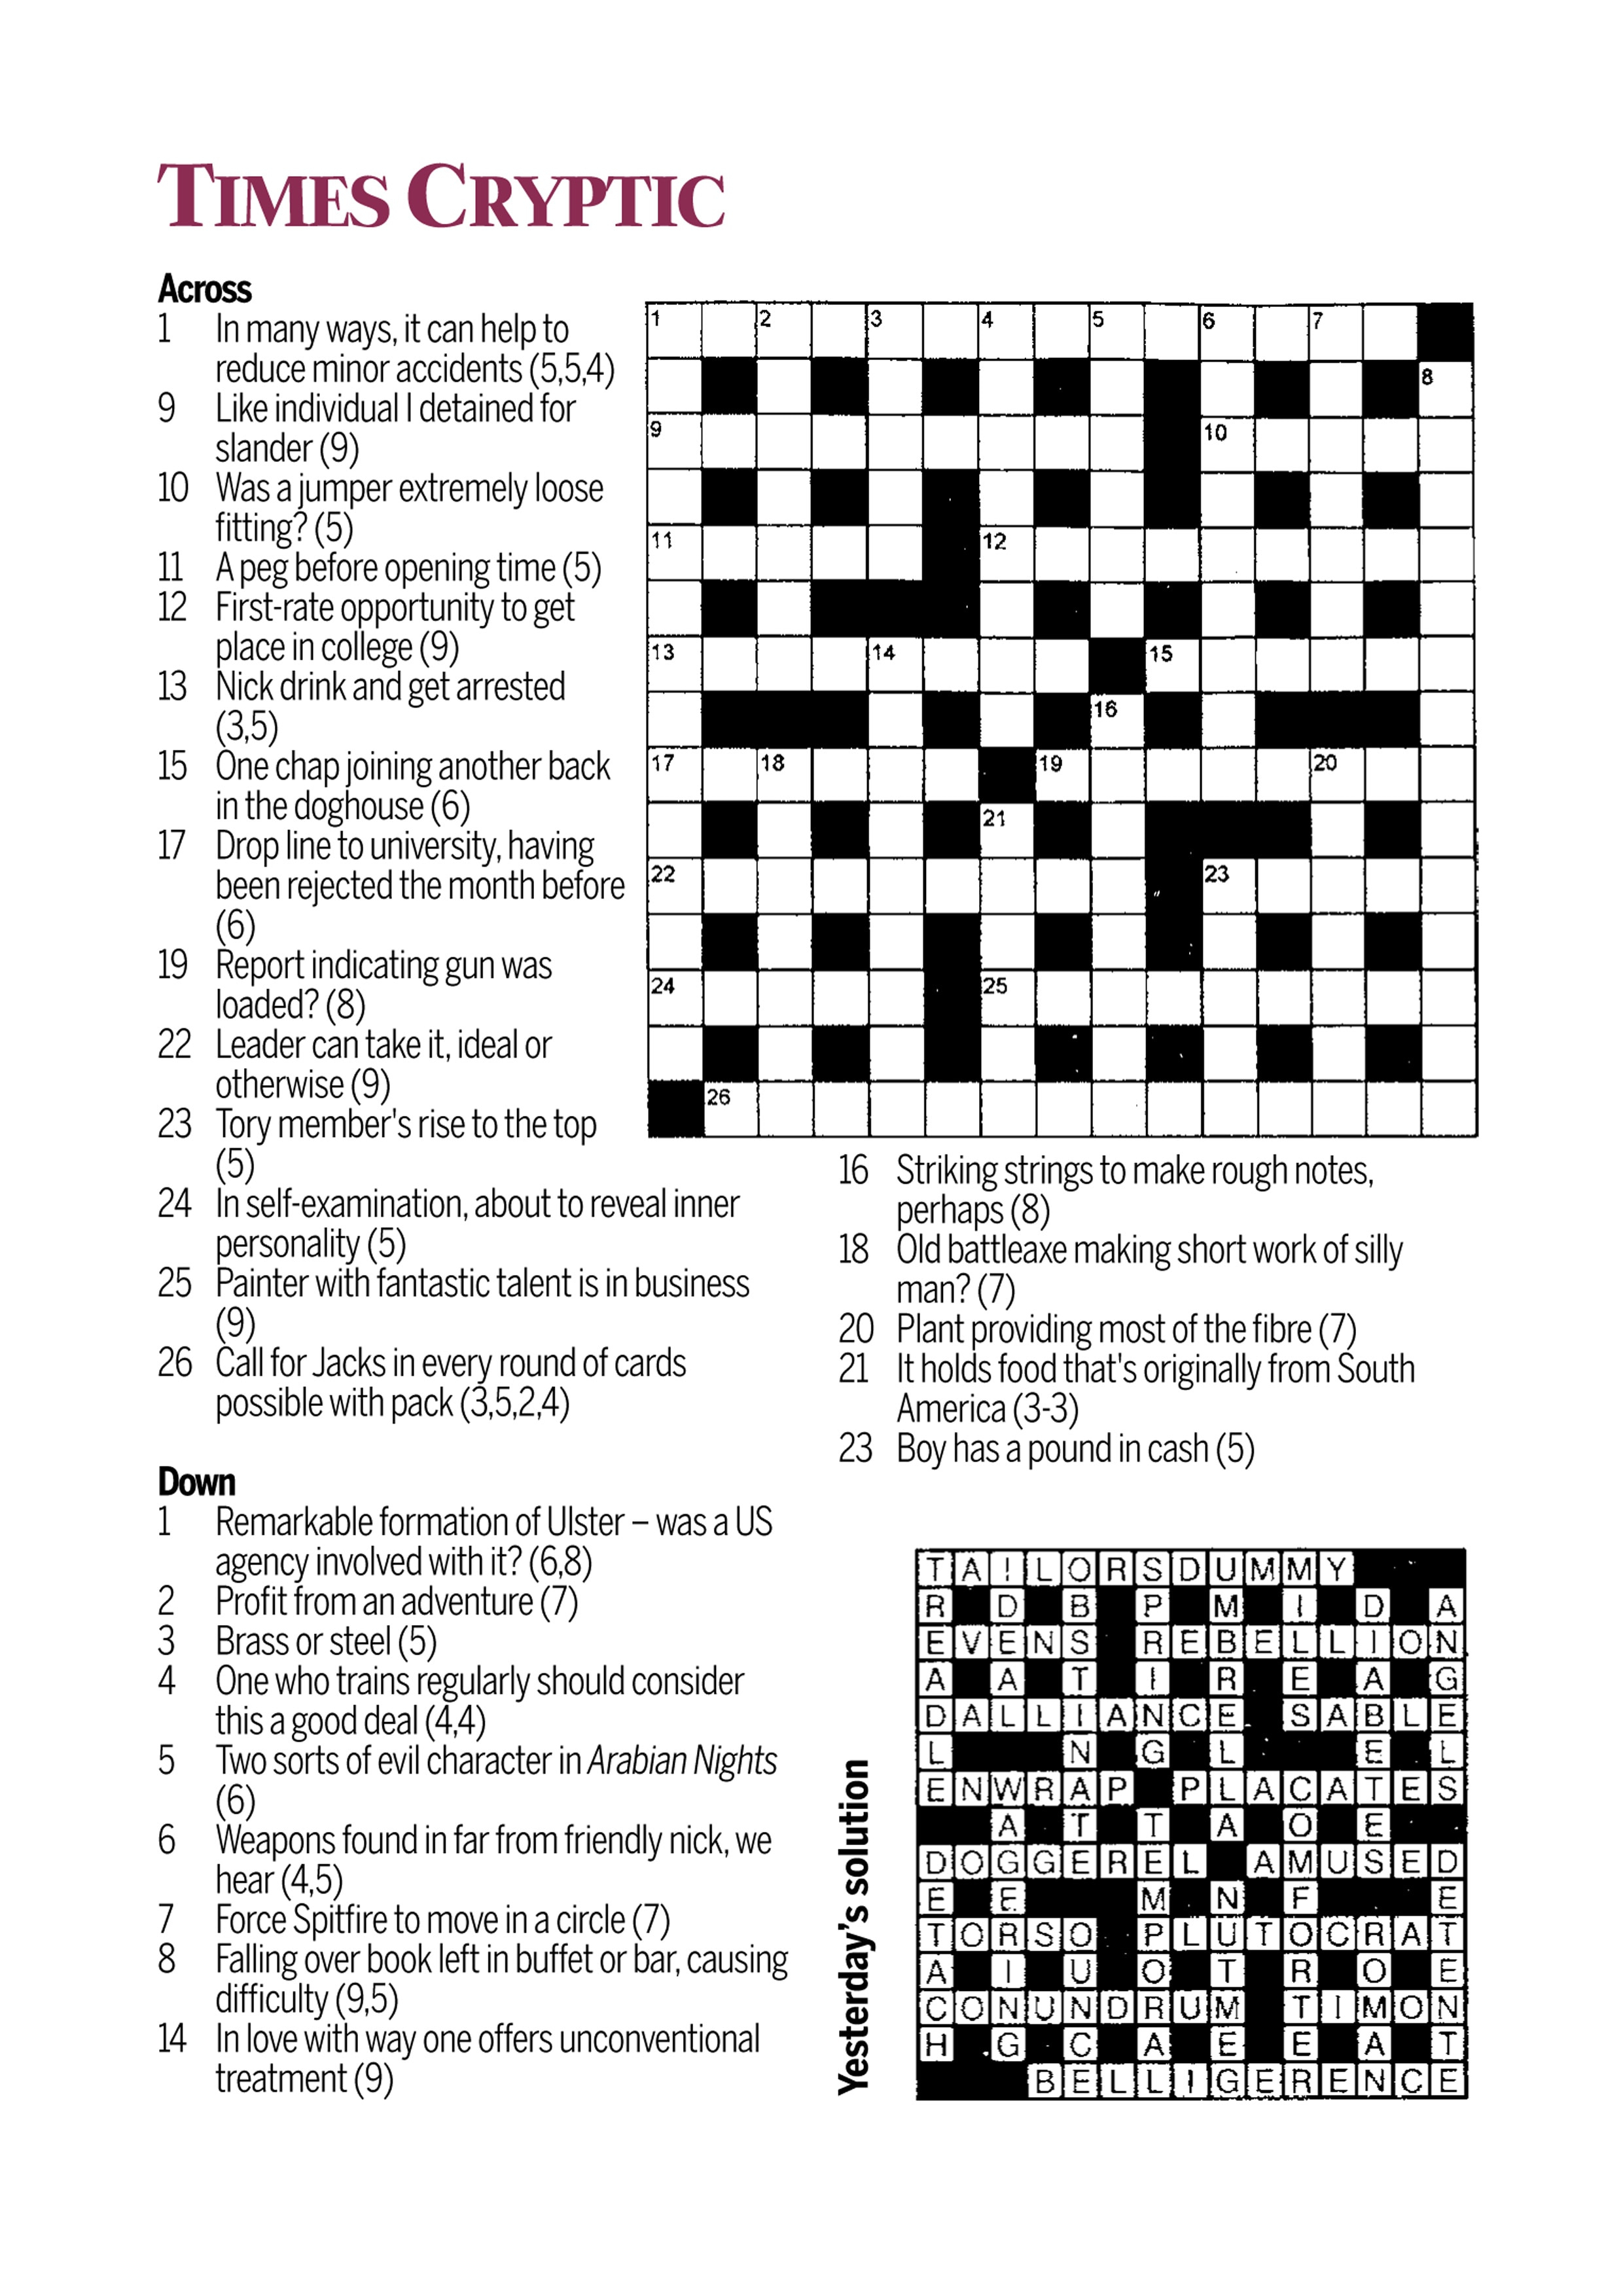 Thursday&amp;#039;s Dominion Post Puzzles Online | Stuff.co.nz - Printable Cryptic Crossword Puzzles Nz